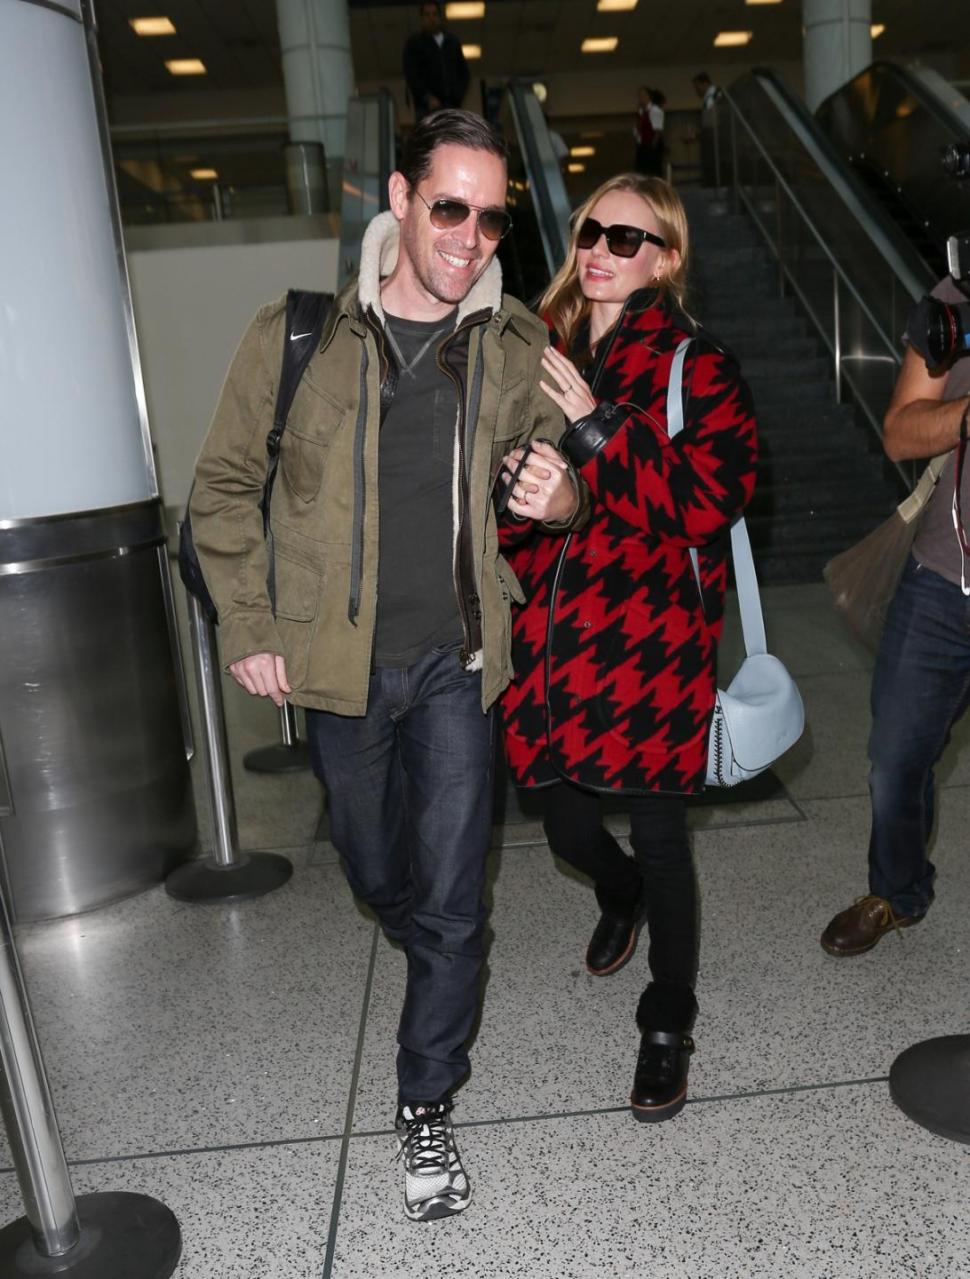 Kate Bosworth and Michael Polish stroll through LAX wearing standard celebrity off-duty looks.